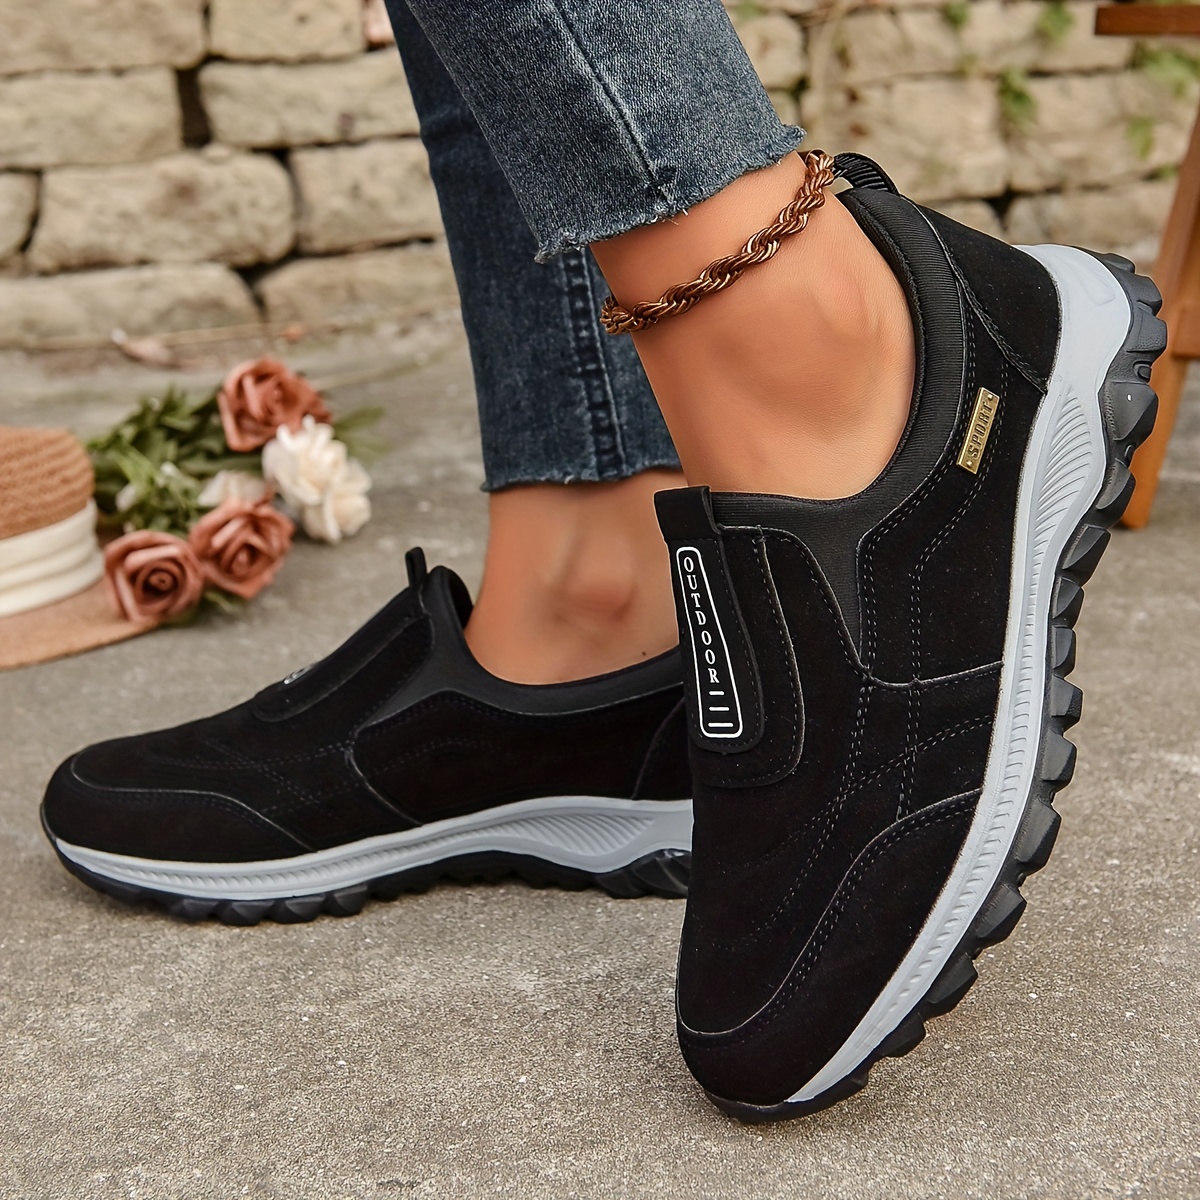 womens letter pattern fashion slip on walking shoes non slip lightweight outdoor athletic sneakers details 9